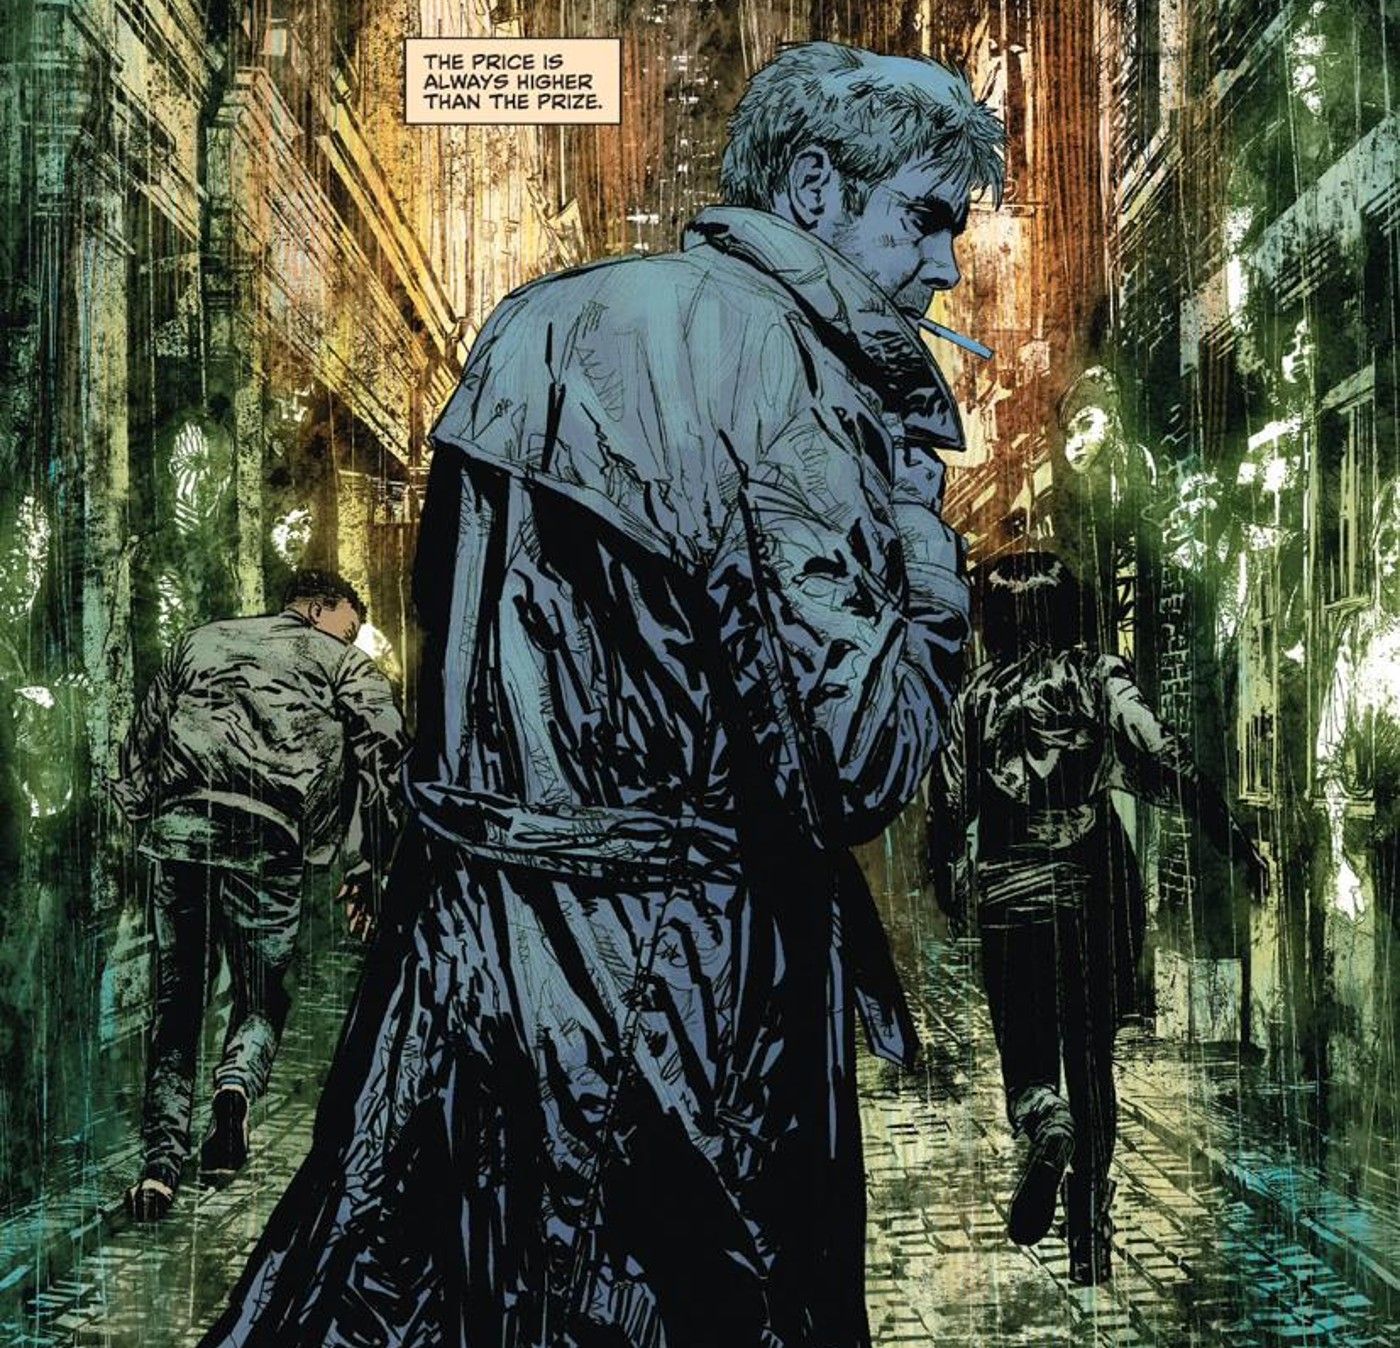 Comic book panel: Constantine in his trench coat looking over his shoulder while smoking.